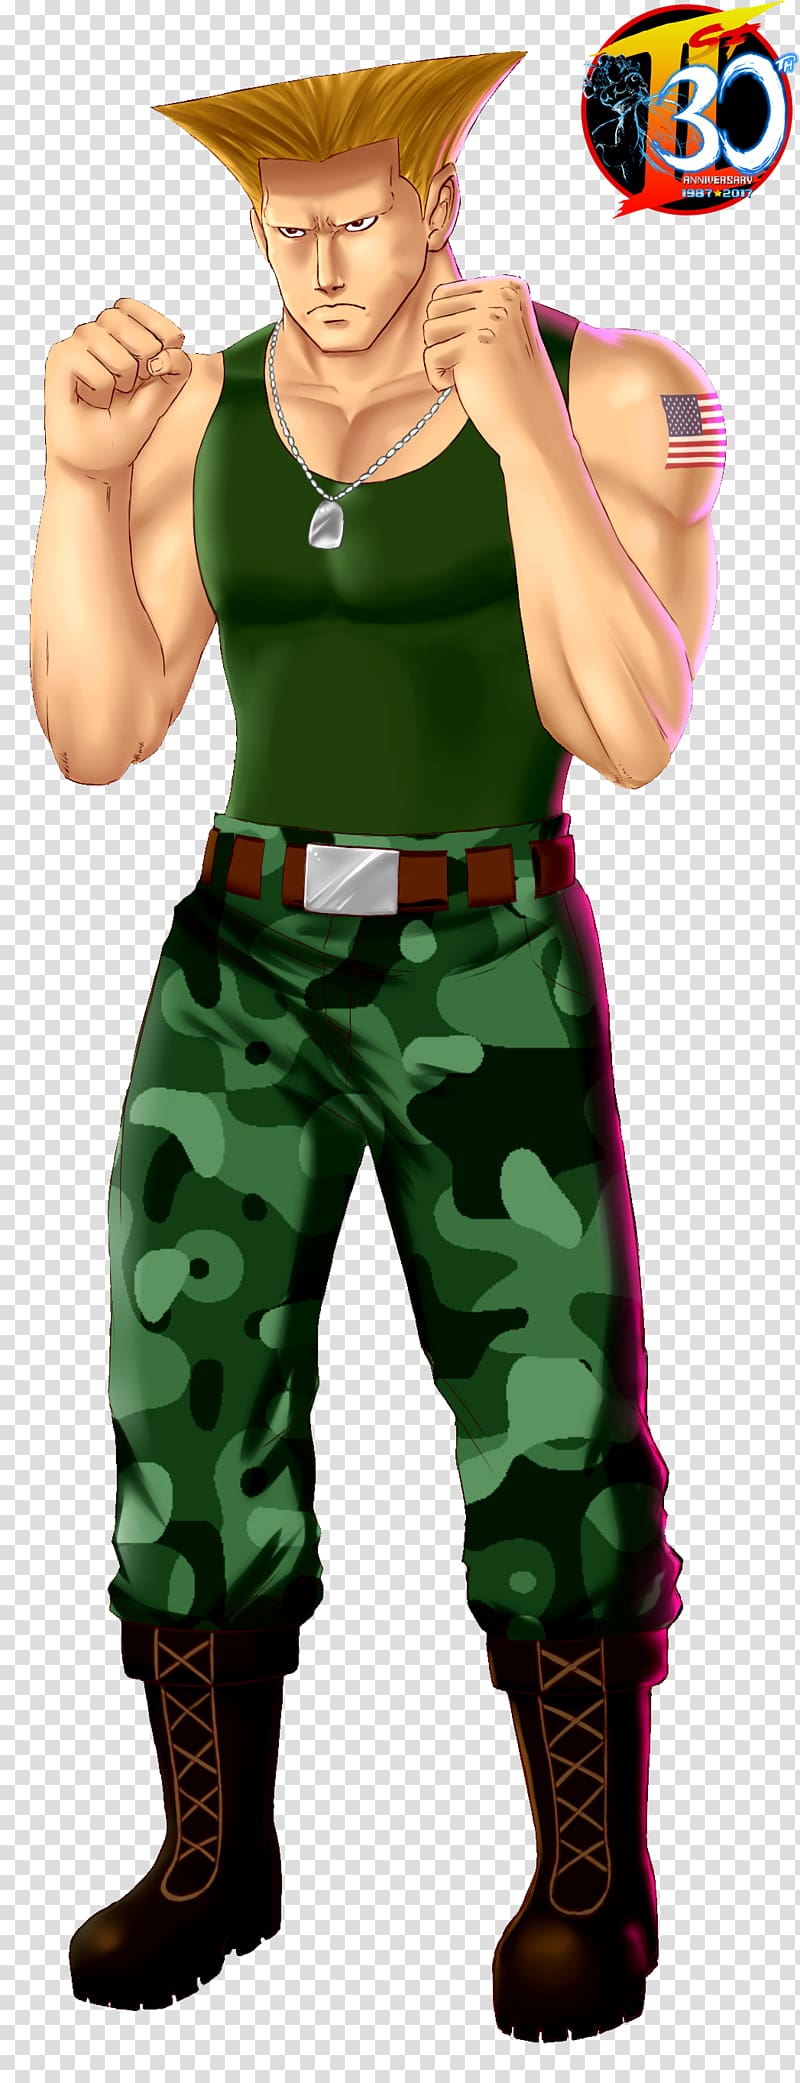 Street Fighter II: The World Warrior Street Fighter 30th Anniversary Collection Guile Shadaloo Soldier, Soldier transparent background PNG clipart